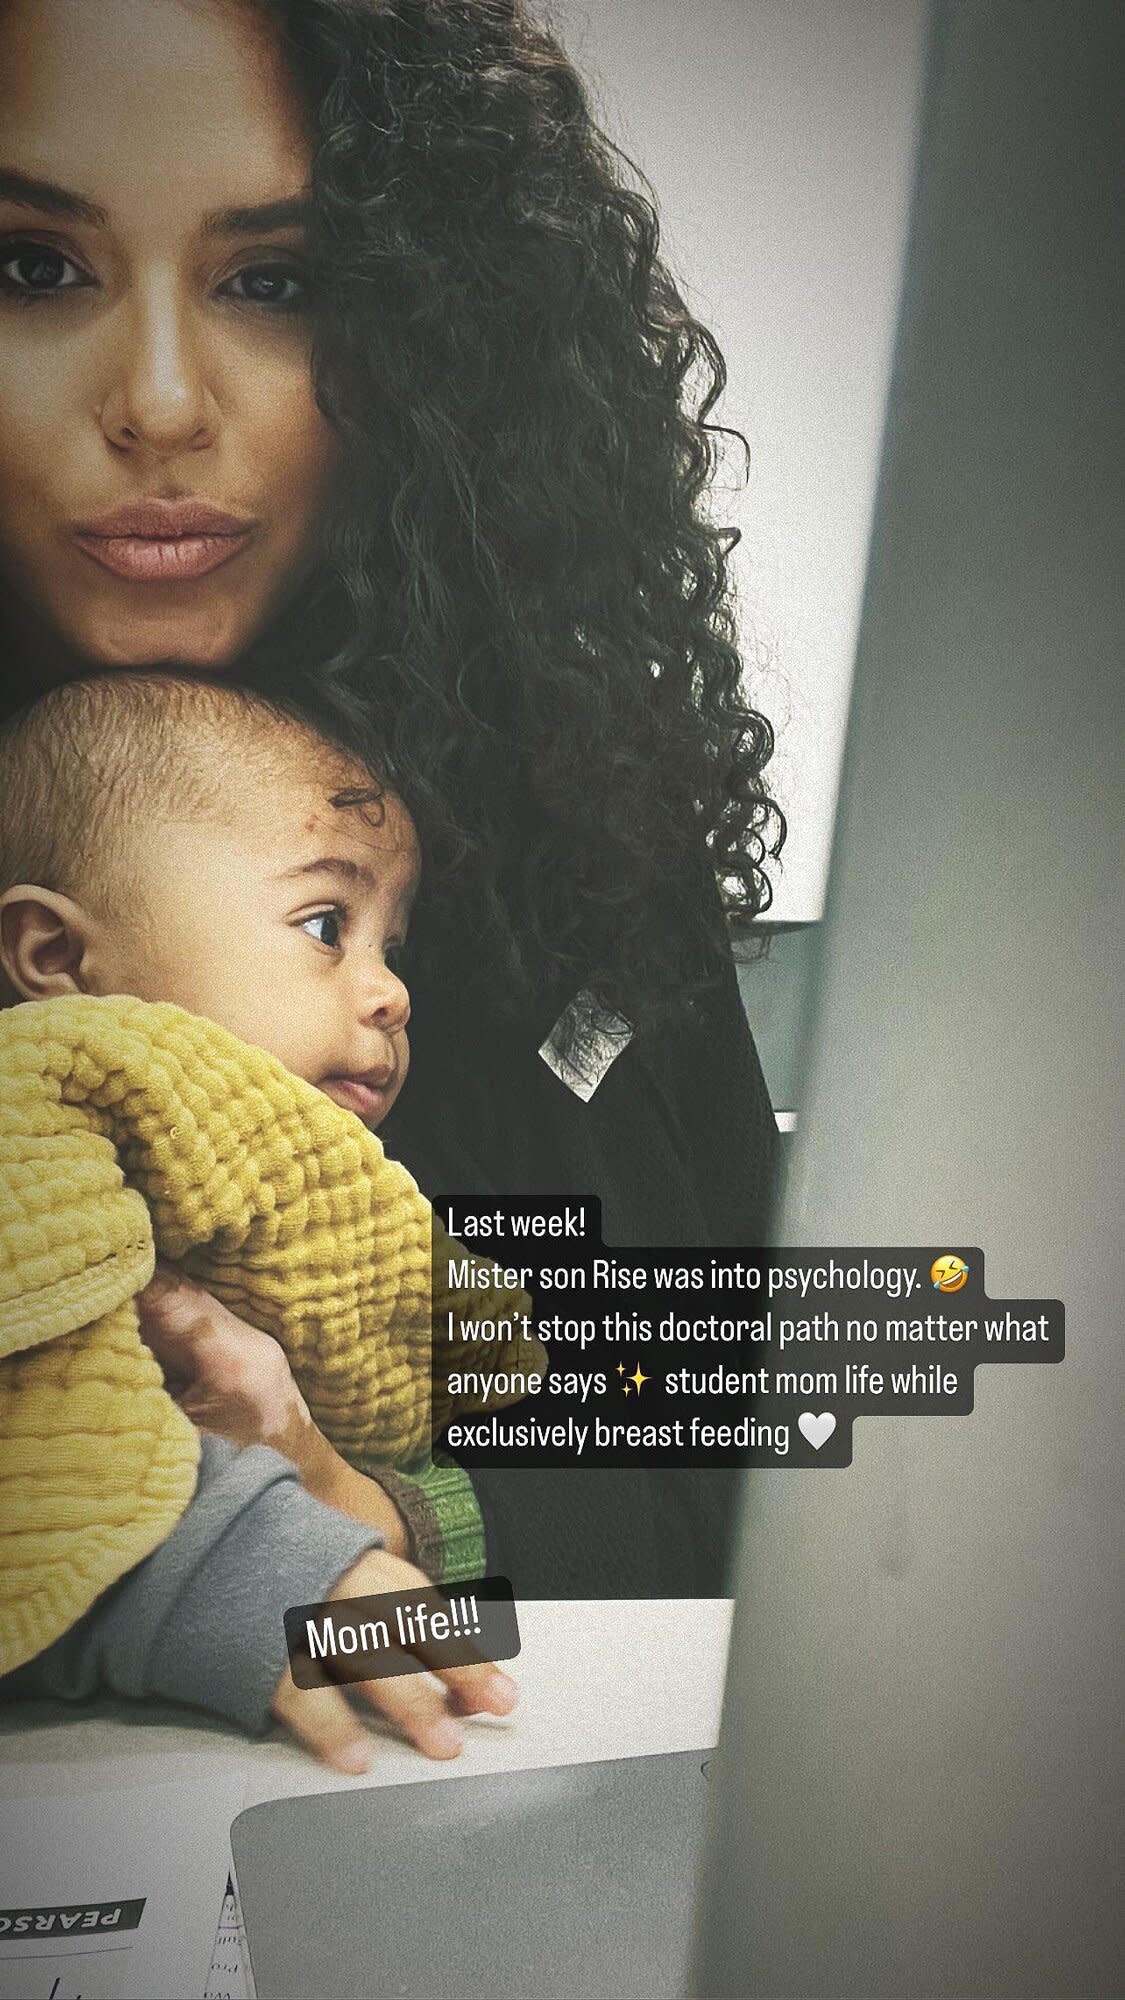 Brittany Bell Shares Photo of Her and Nick Cannon's Son Rise on Campus with Her as She Opens Up About Being a Student Mom